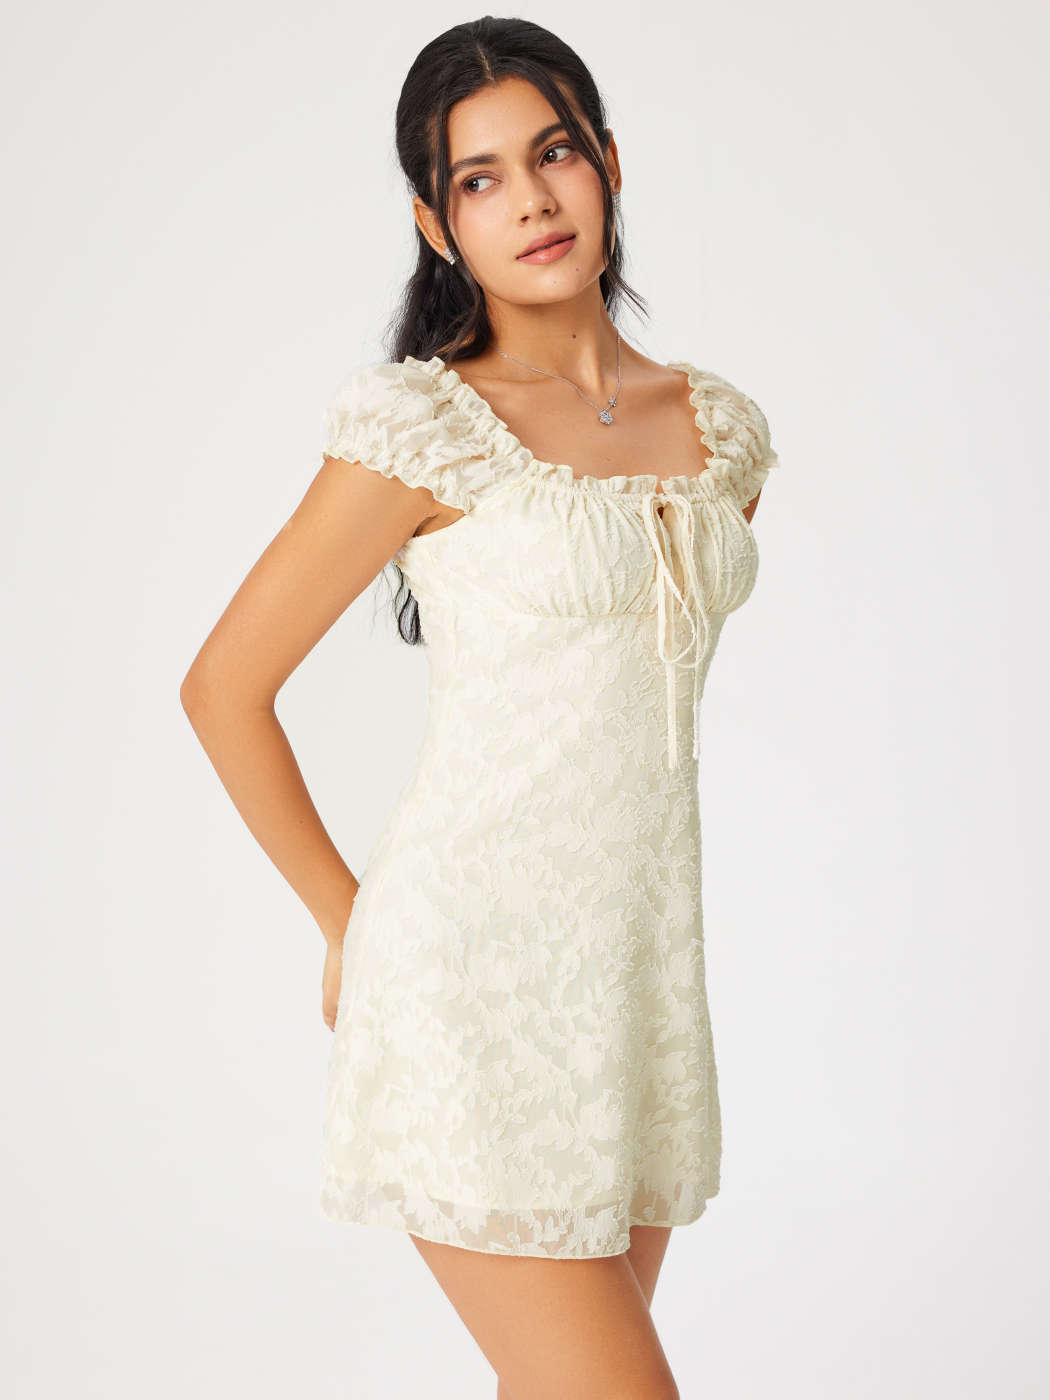 Short White Floral Dress with Jacquard Ruffles